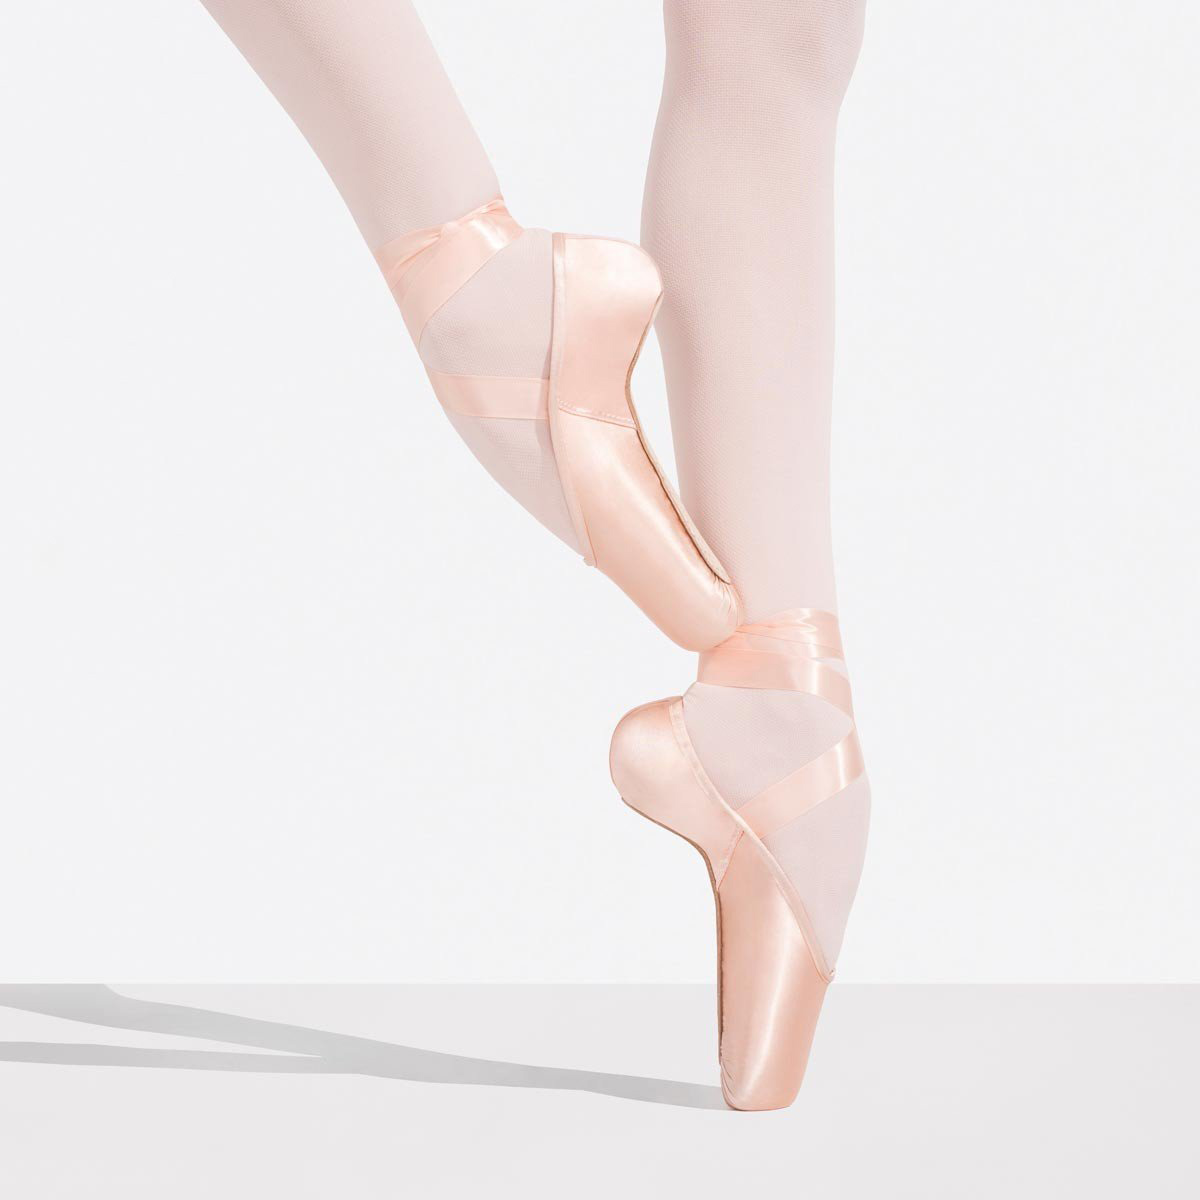 OPINION: Ballet is the best dance style